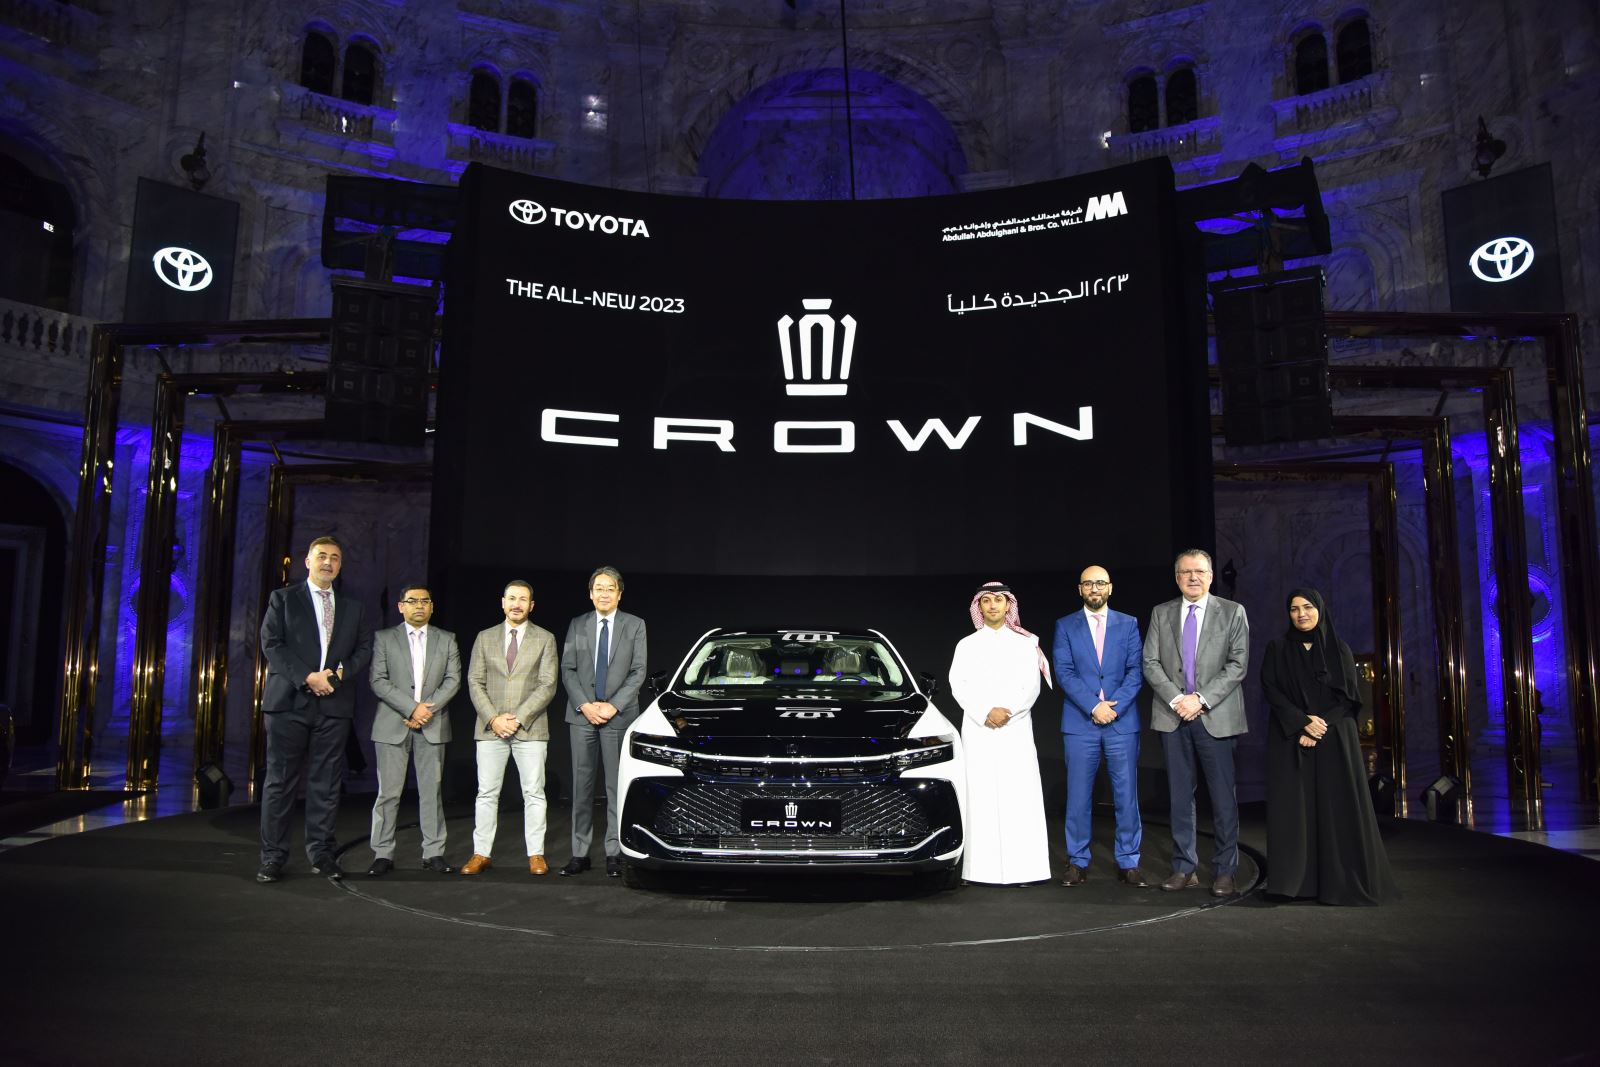 The Legend is back-Toyota Crown is in Qatar